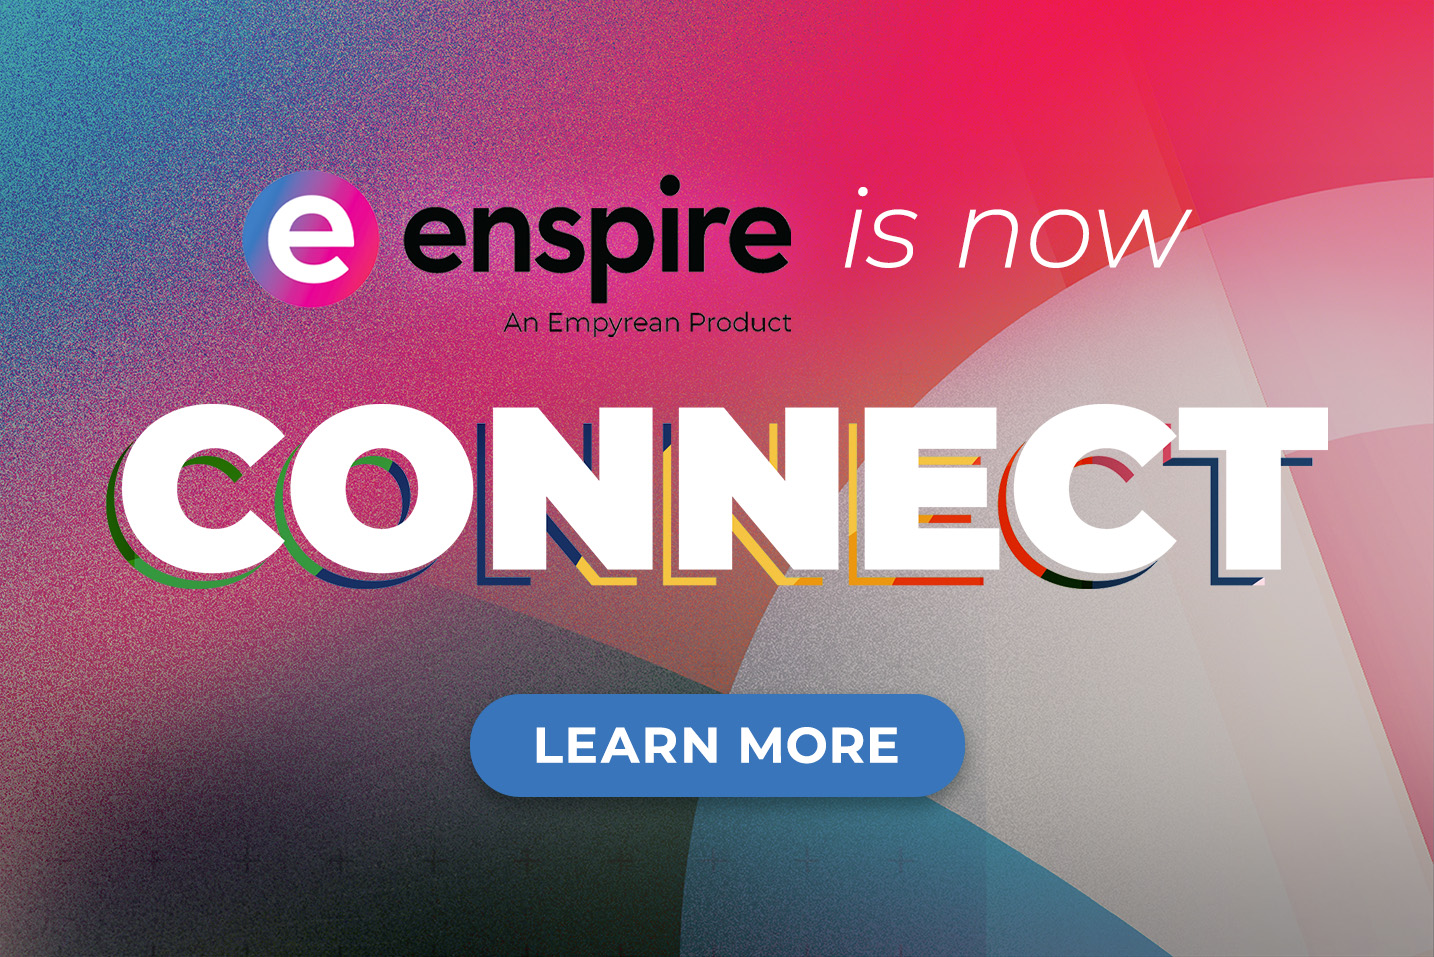 enspire is now Connect